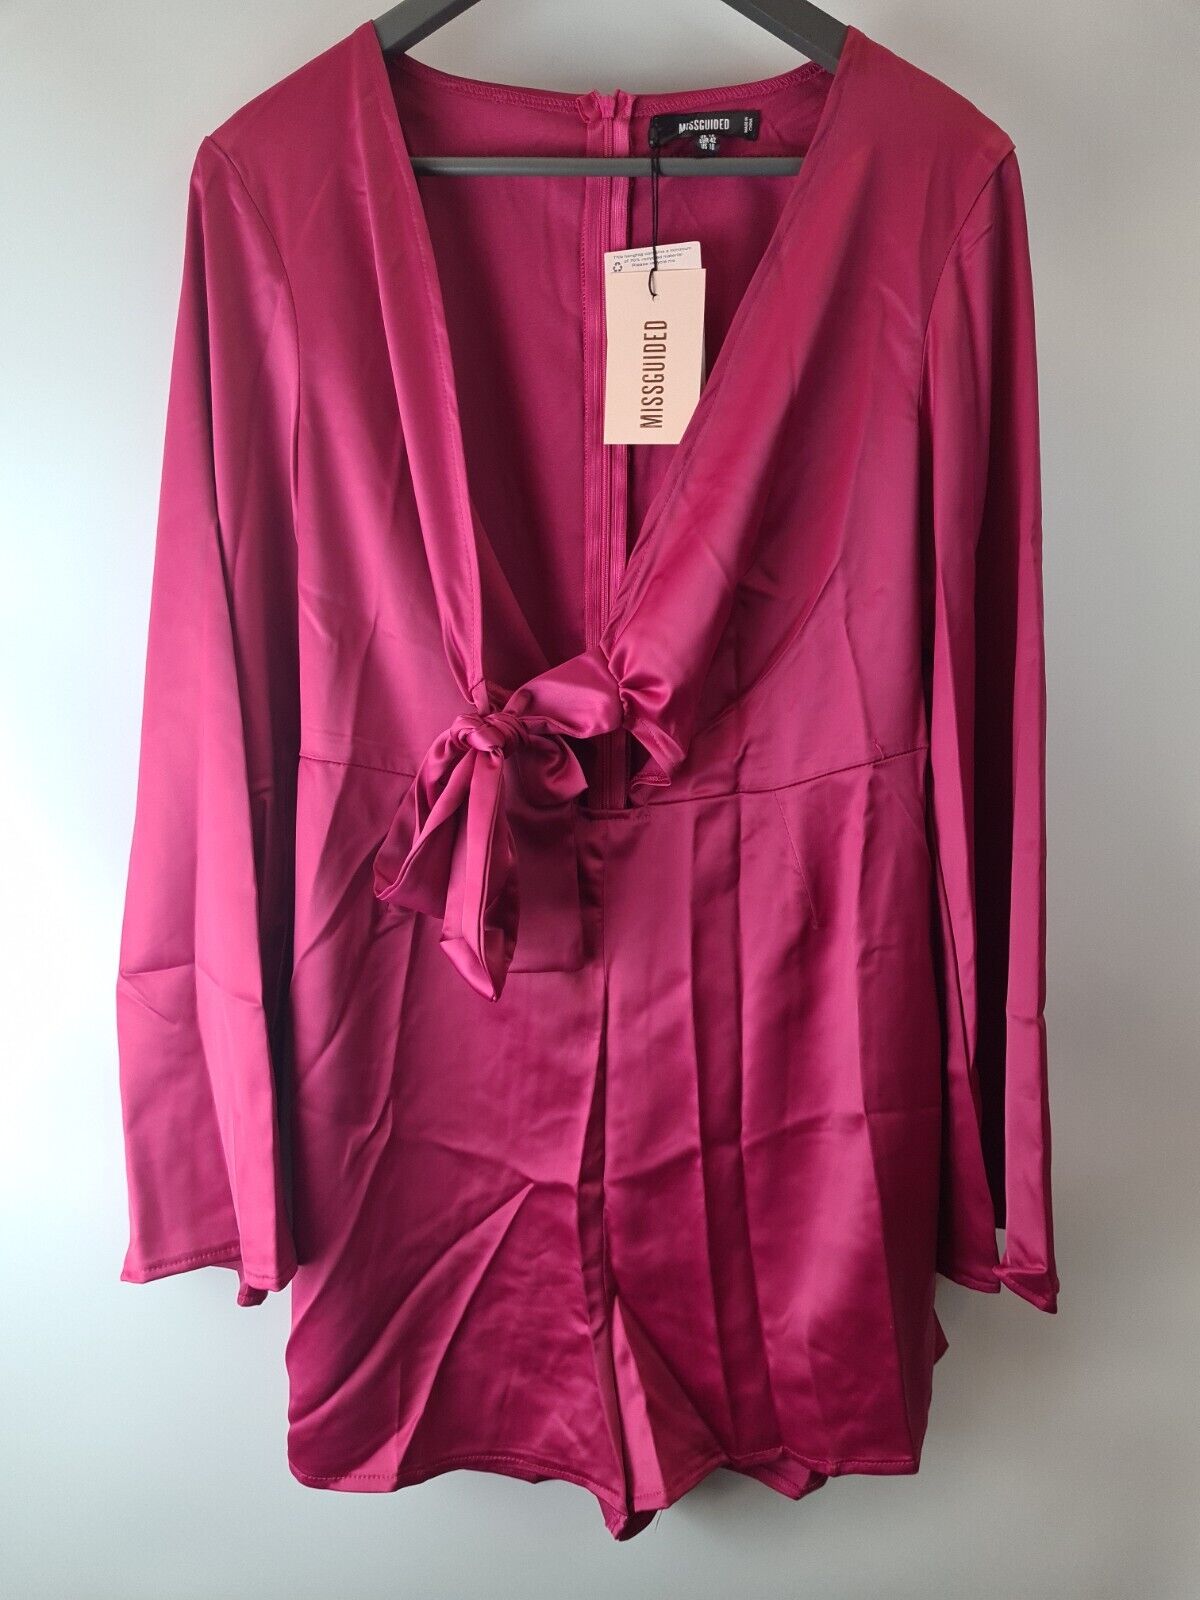 Missguided Satin Tie Front Flare Sleeves Hot Pink Playsuit Size 12 **** V31